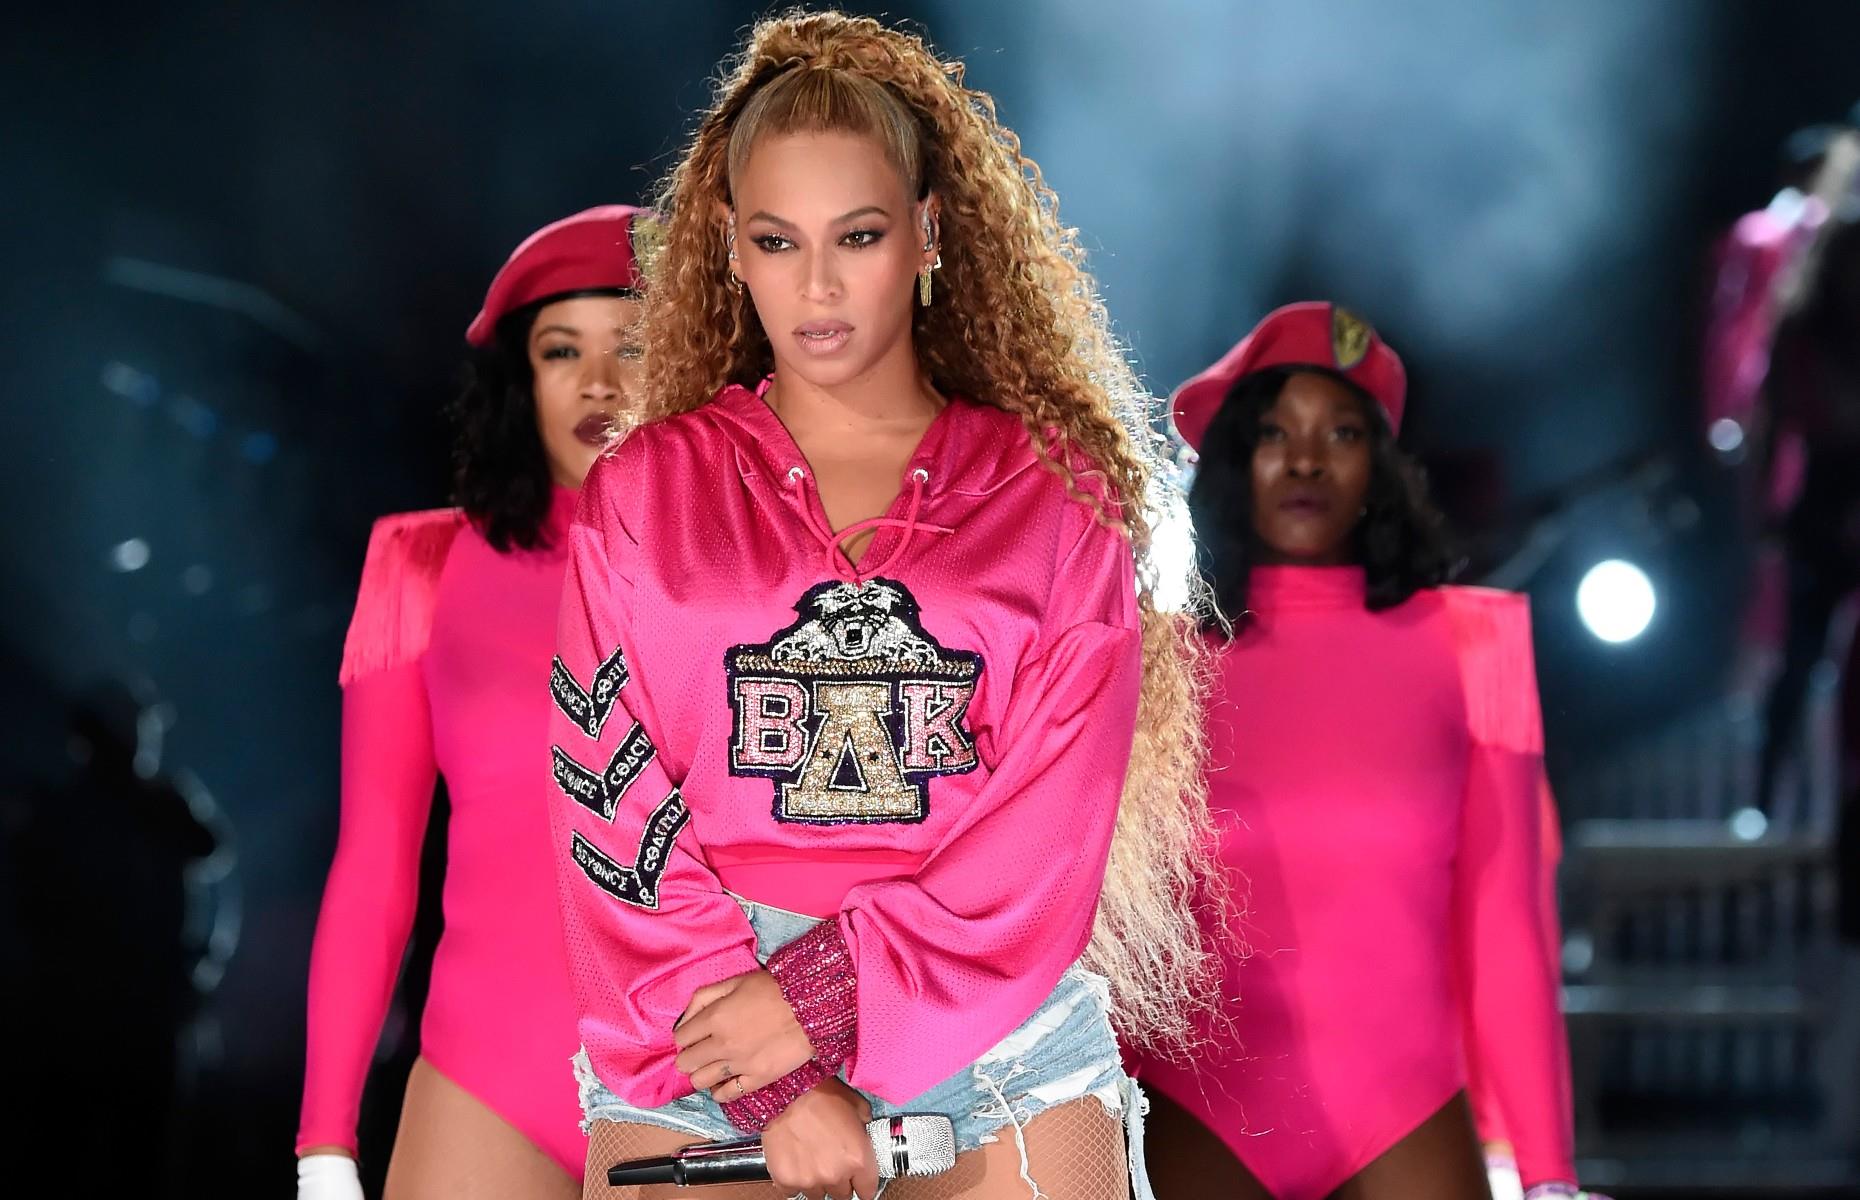 <p>In 2016, Beyonce's Formation world tour grossed $250 million. She also headlined music festival Coachella in 2018, making history as the first Black woman to do so. Her estimated paycheck for the performance was $3 million. Her iconic Coachella performance was released on Netflix as part of a three-project deal estimated to be worth a total of $60 million.</p>